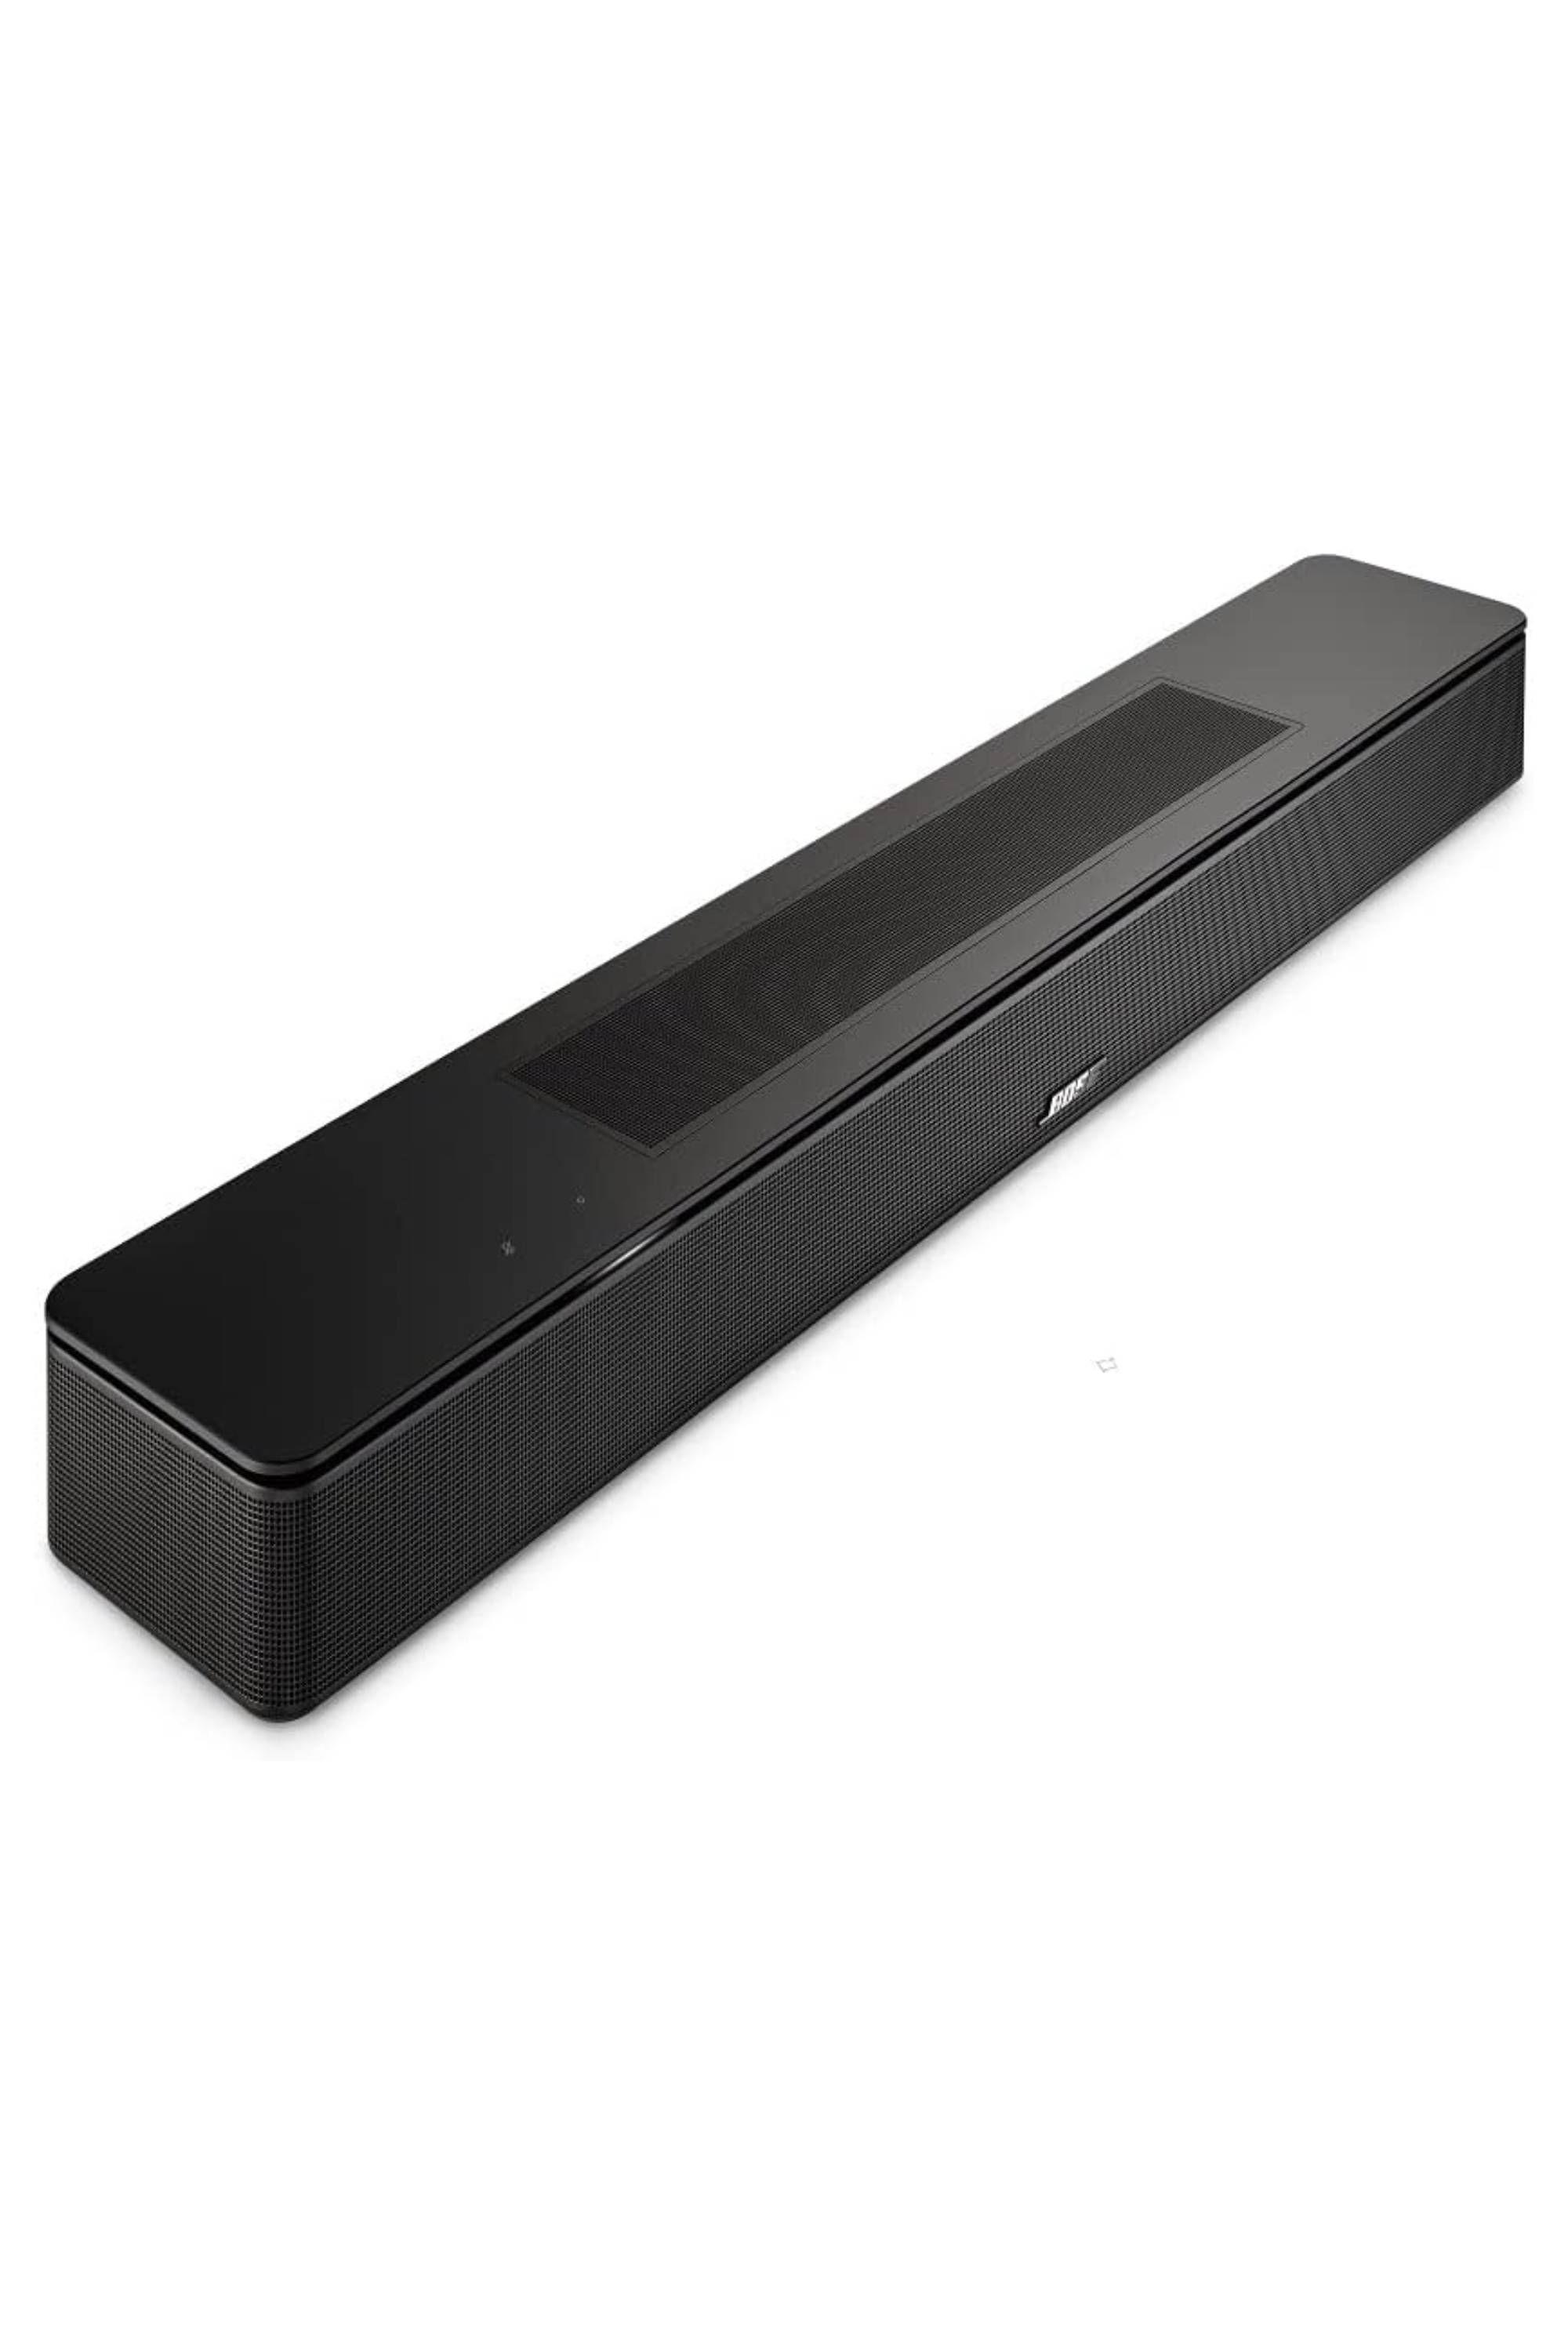 Bang & Olufsen enters the soundbar market with Beosound Stage